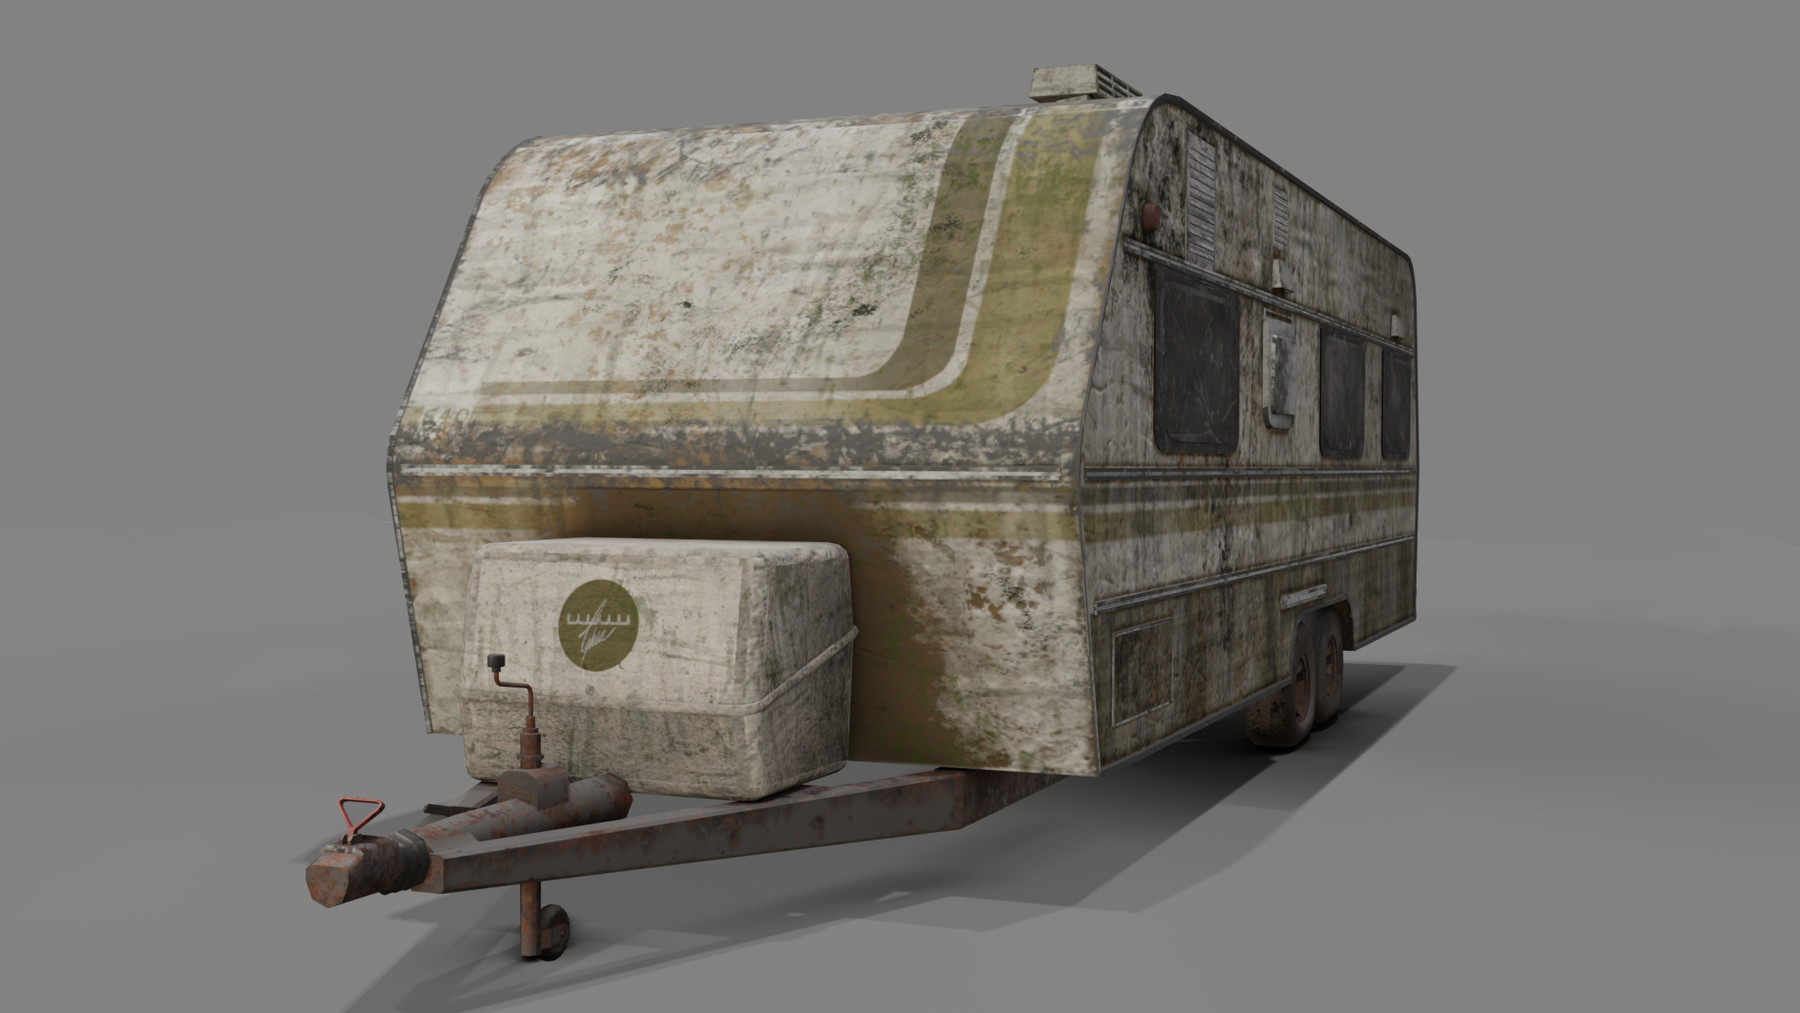 Мод на караваны. Караван 3d Max. 3d model of abandonment.